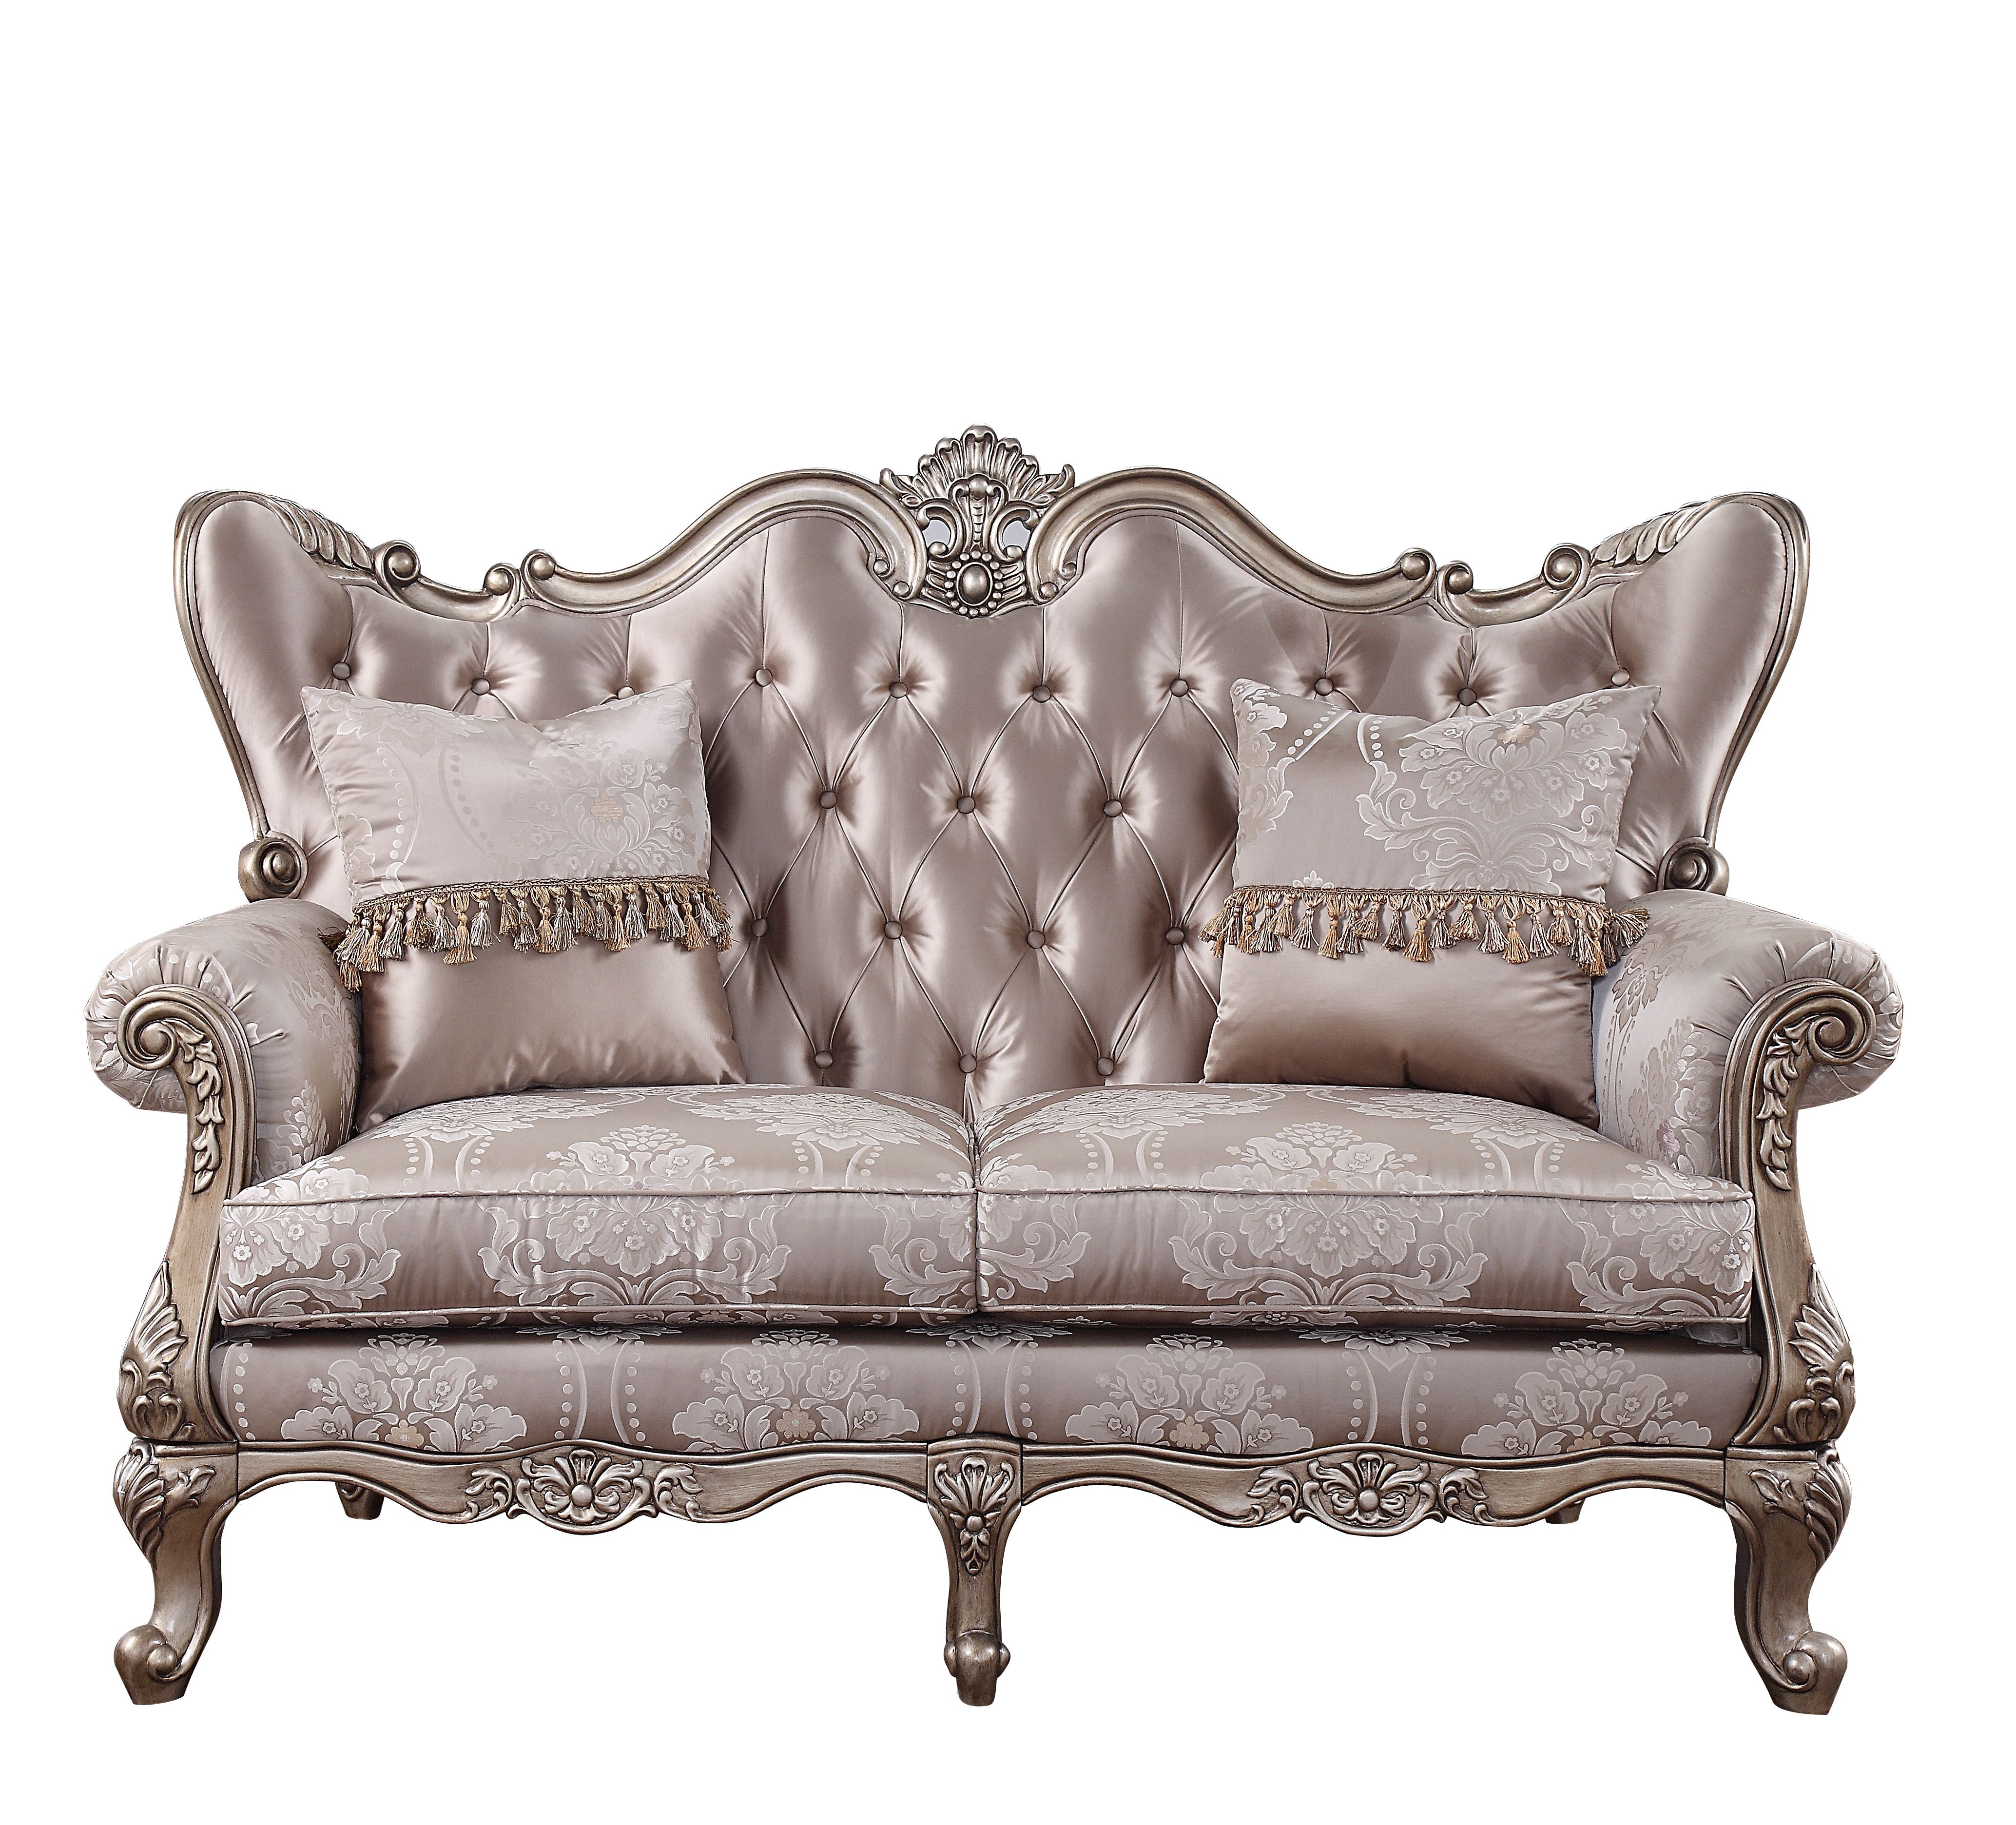 ACME Furniture Sofas & Couches - ACME Jayceon Loveseat w/2 Pillows, Fabric & Champagne